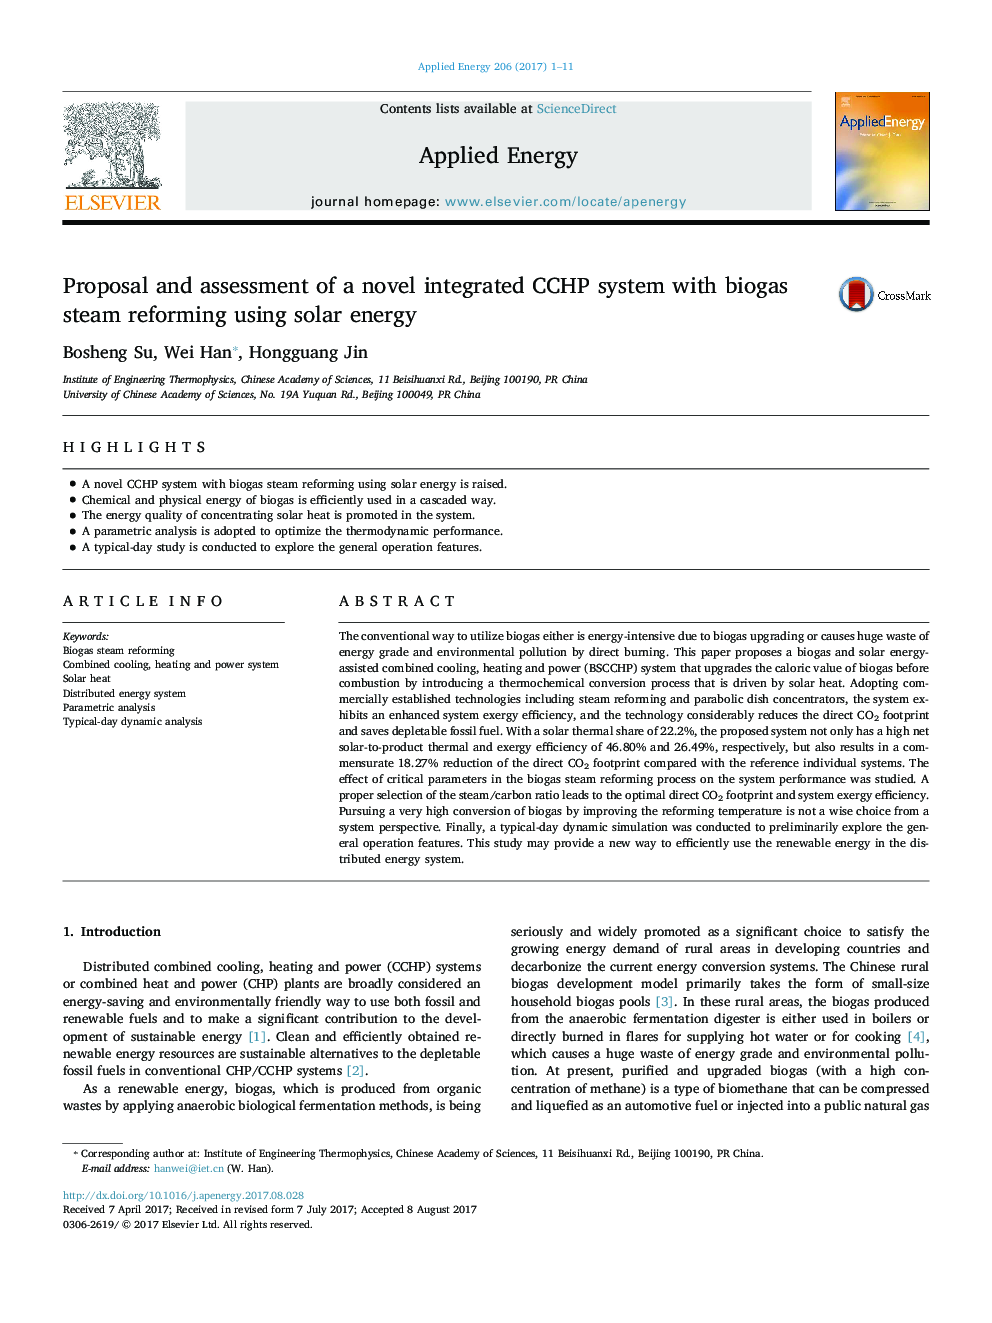 Proposal and assessment of a novel integrated CCHP system with biogas steam reforming using solar energy